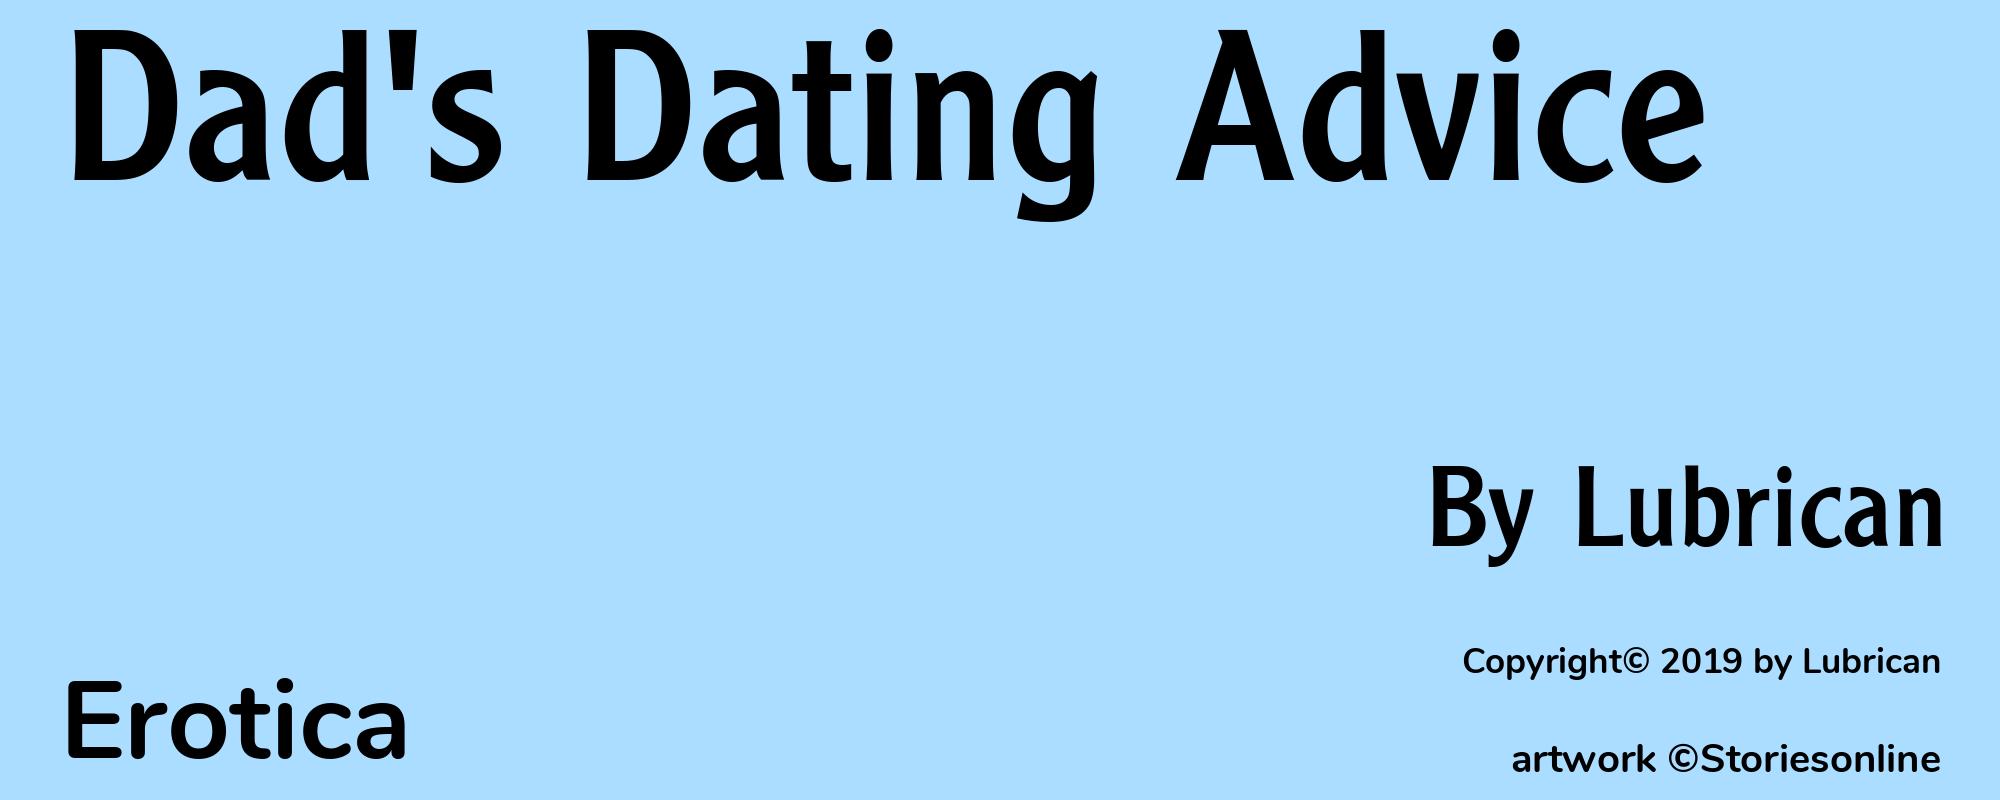 Dad's Dating Advice - Cover